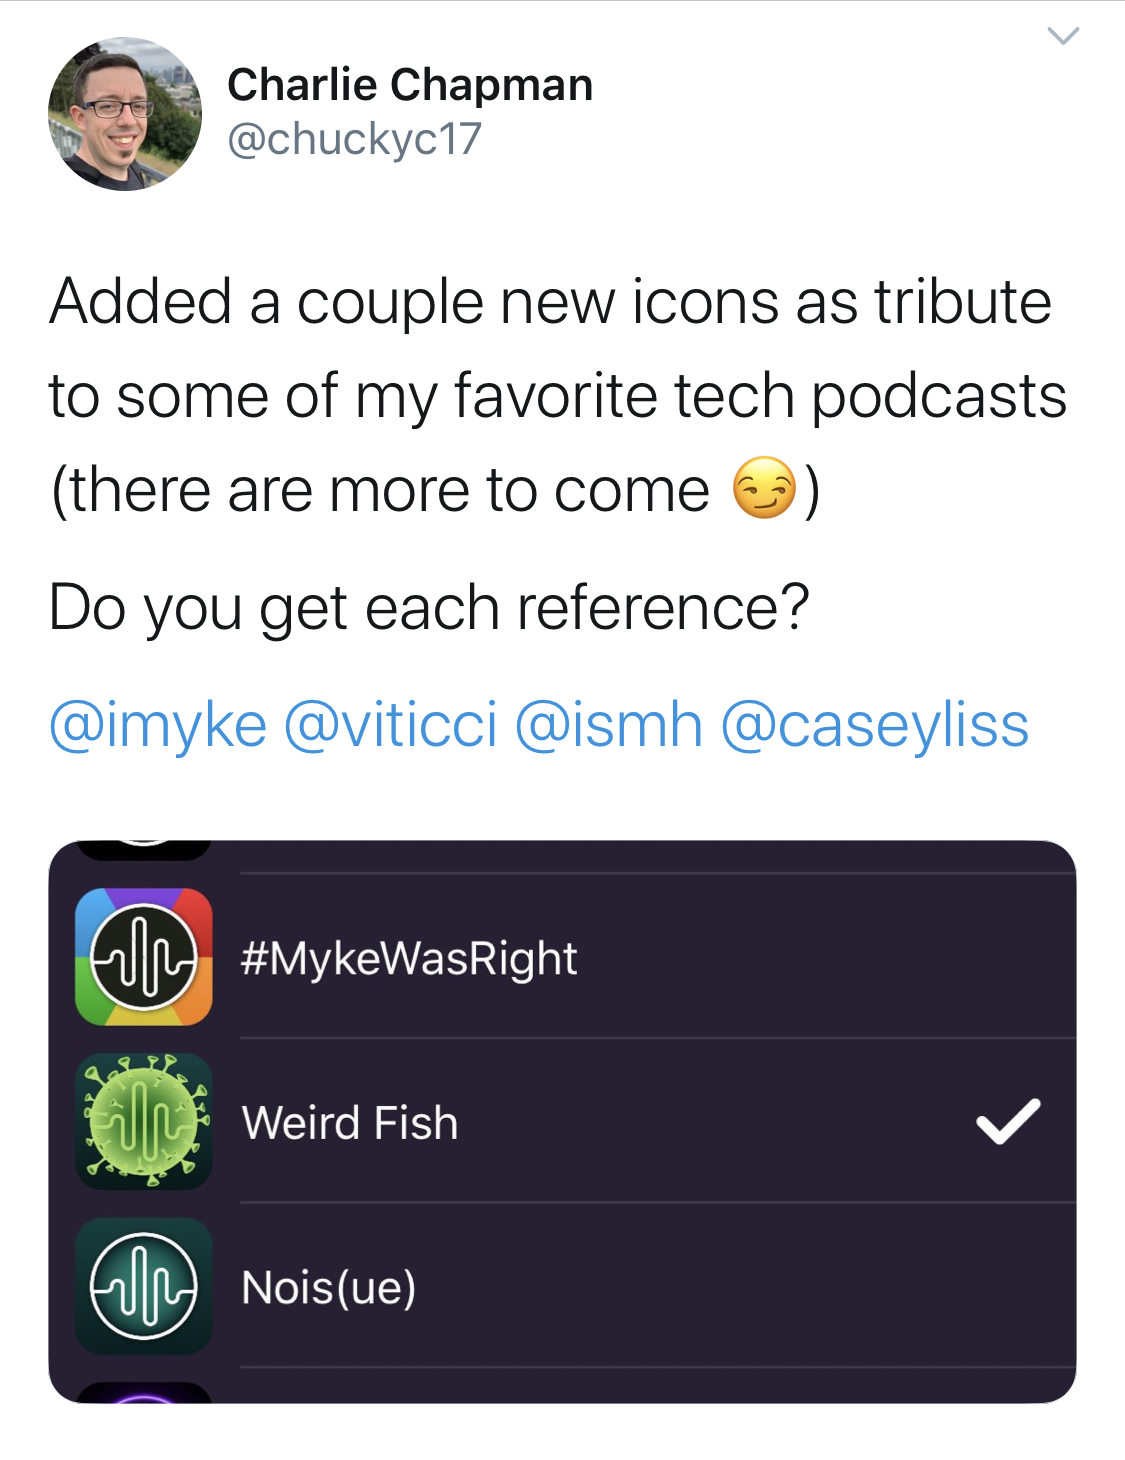 Tweet about custom icons